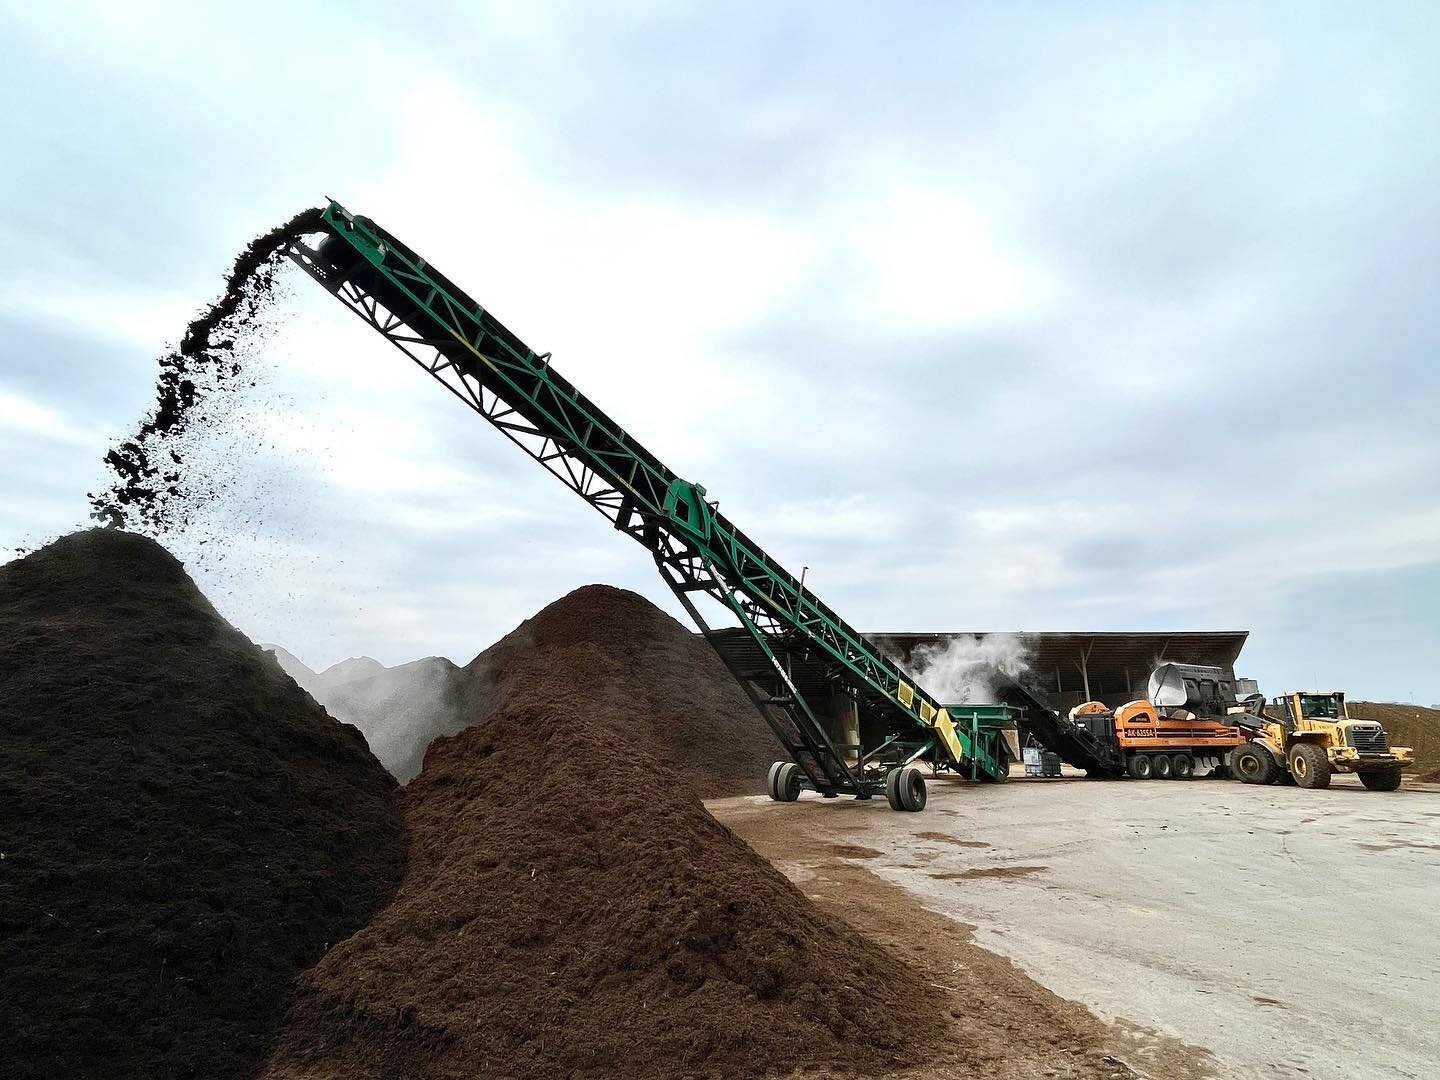 We&rsquo;re gearing up for this year&rsquo;s mulch season! Visit our new online shop at kreidermulch.com to place your order.